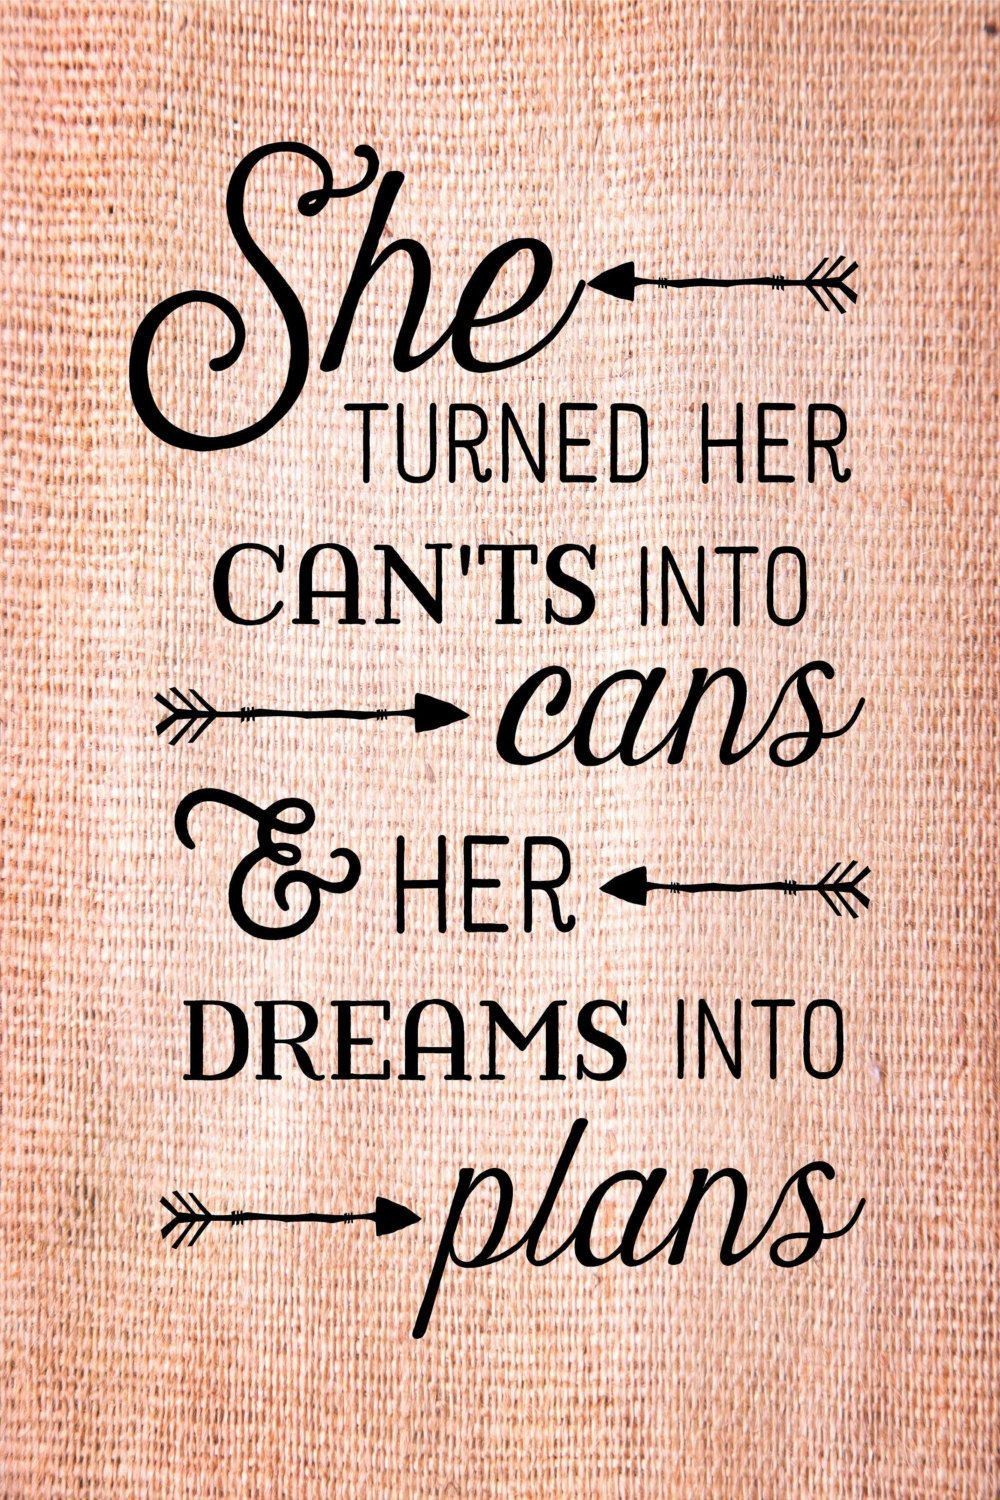 Graduation Motivational Quotes
 Graduation Gift She turned her can ts into cans dreams